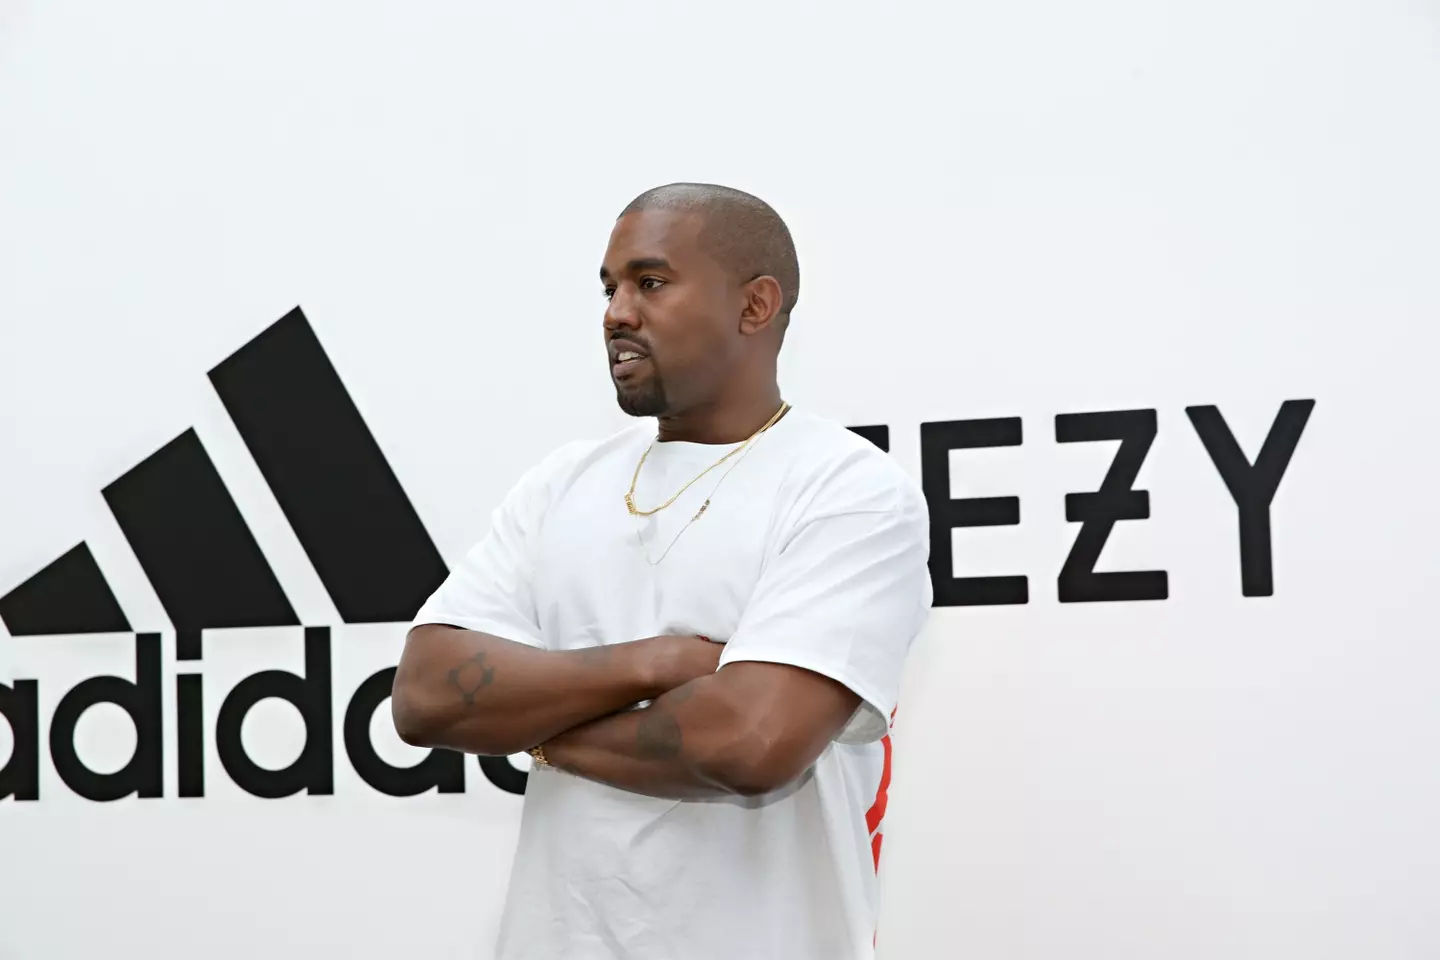 Phillips says he started working for Yeezy shortly after Ye was dropped by Adidas.